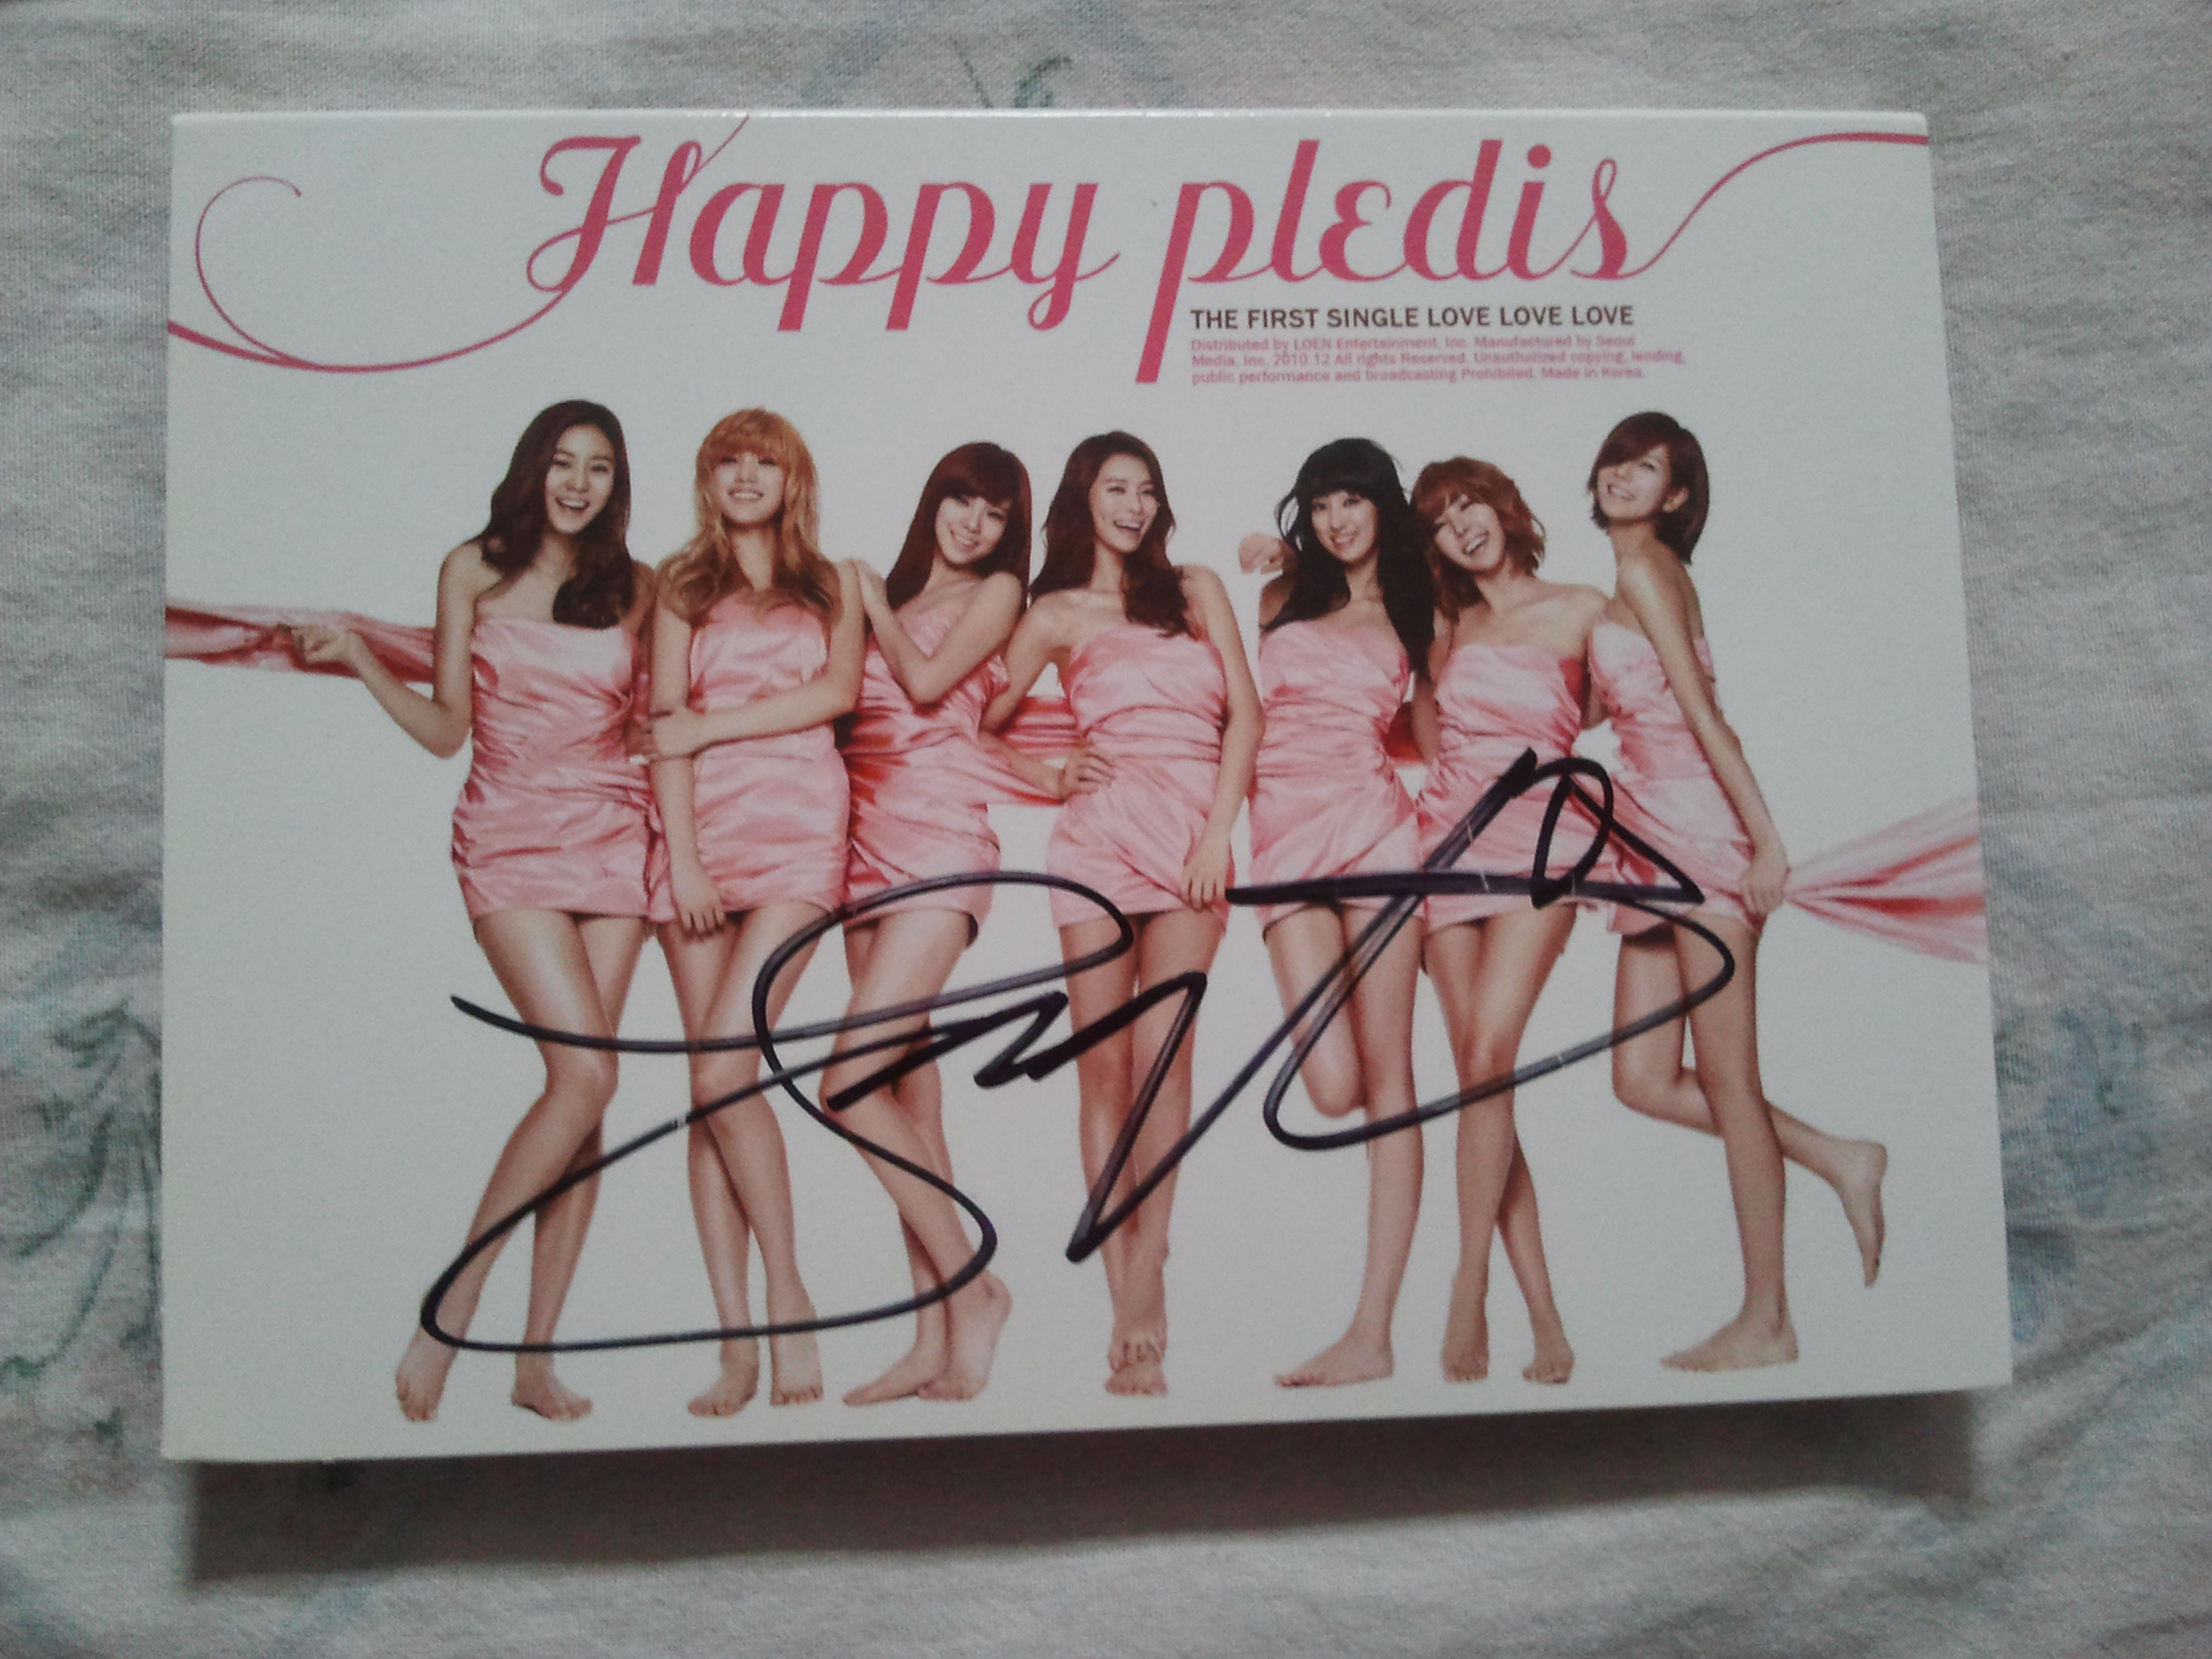 [DISCUSSION] Are the AS members changing their autographs? Calling detective PGZ and PBZ! 15862420140820134305